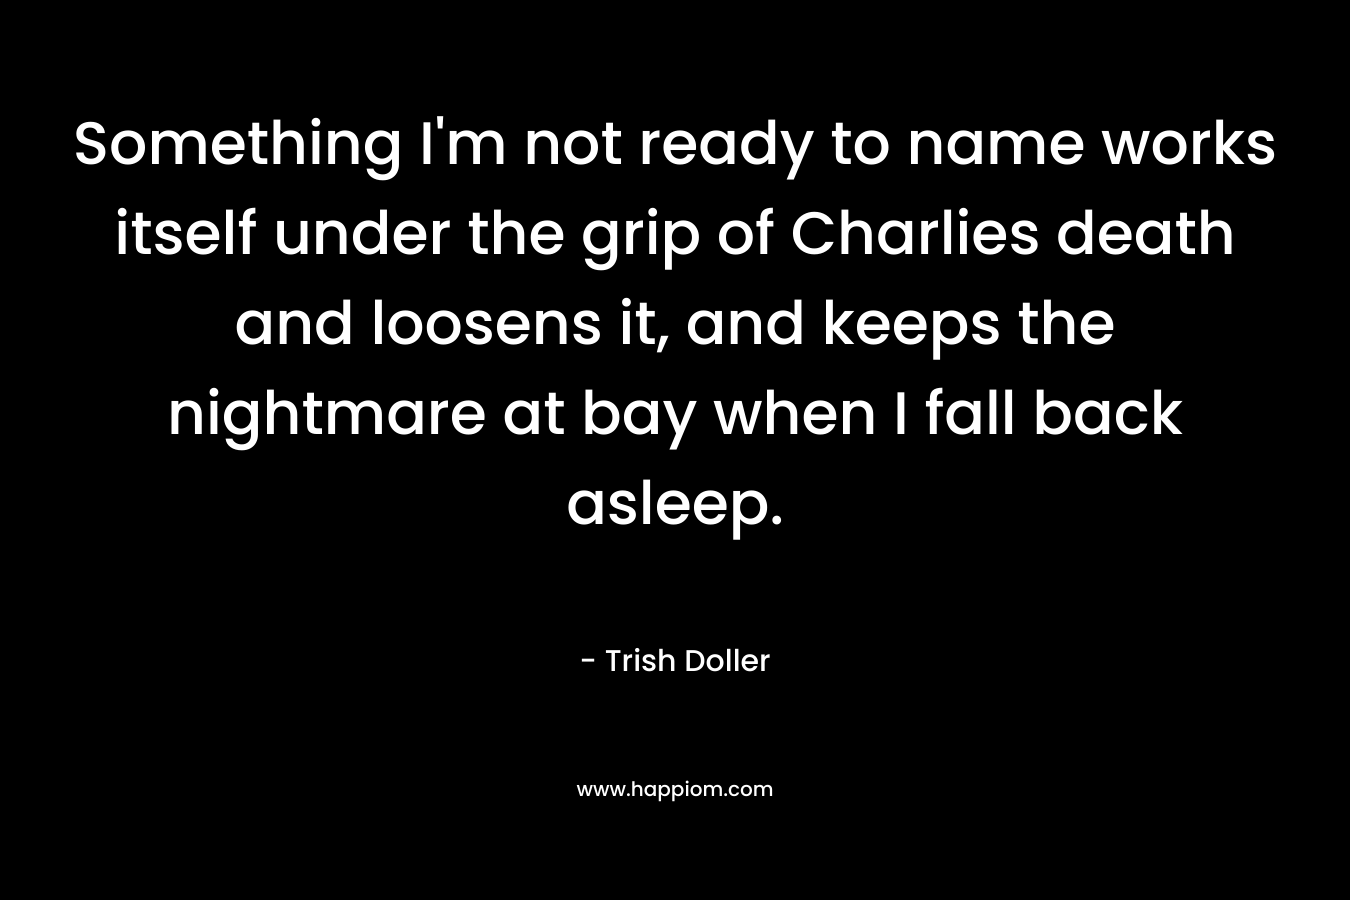 Something I’m not ready to name works itself under the grip of Charlies death and loosens it, and keeps the nightmare at bay when I fall back asleep. – Trish Doller